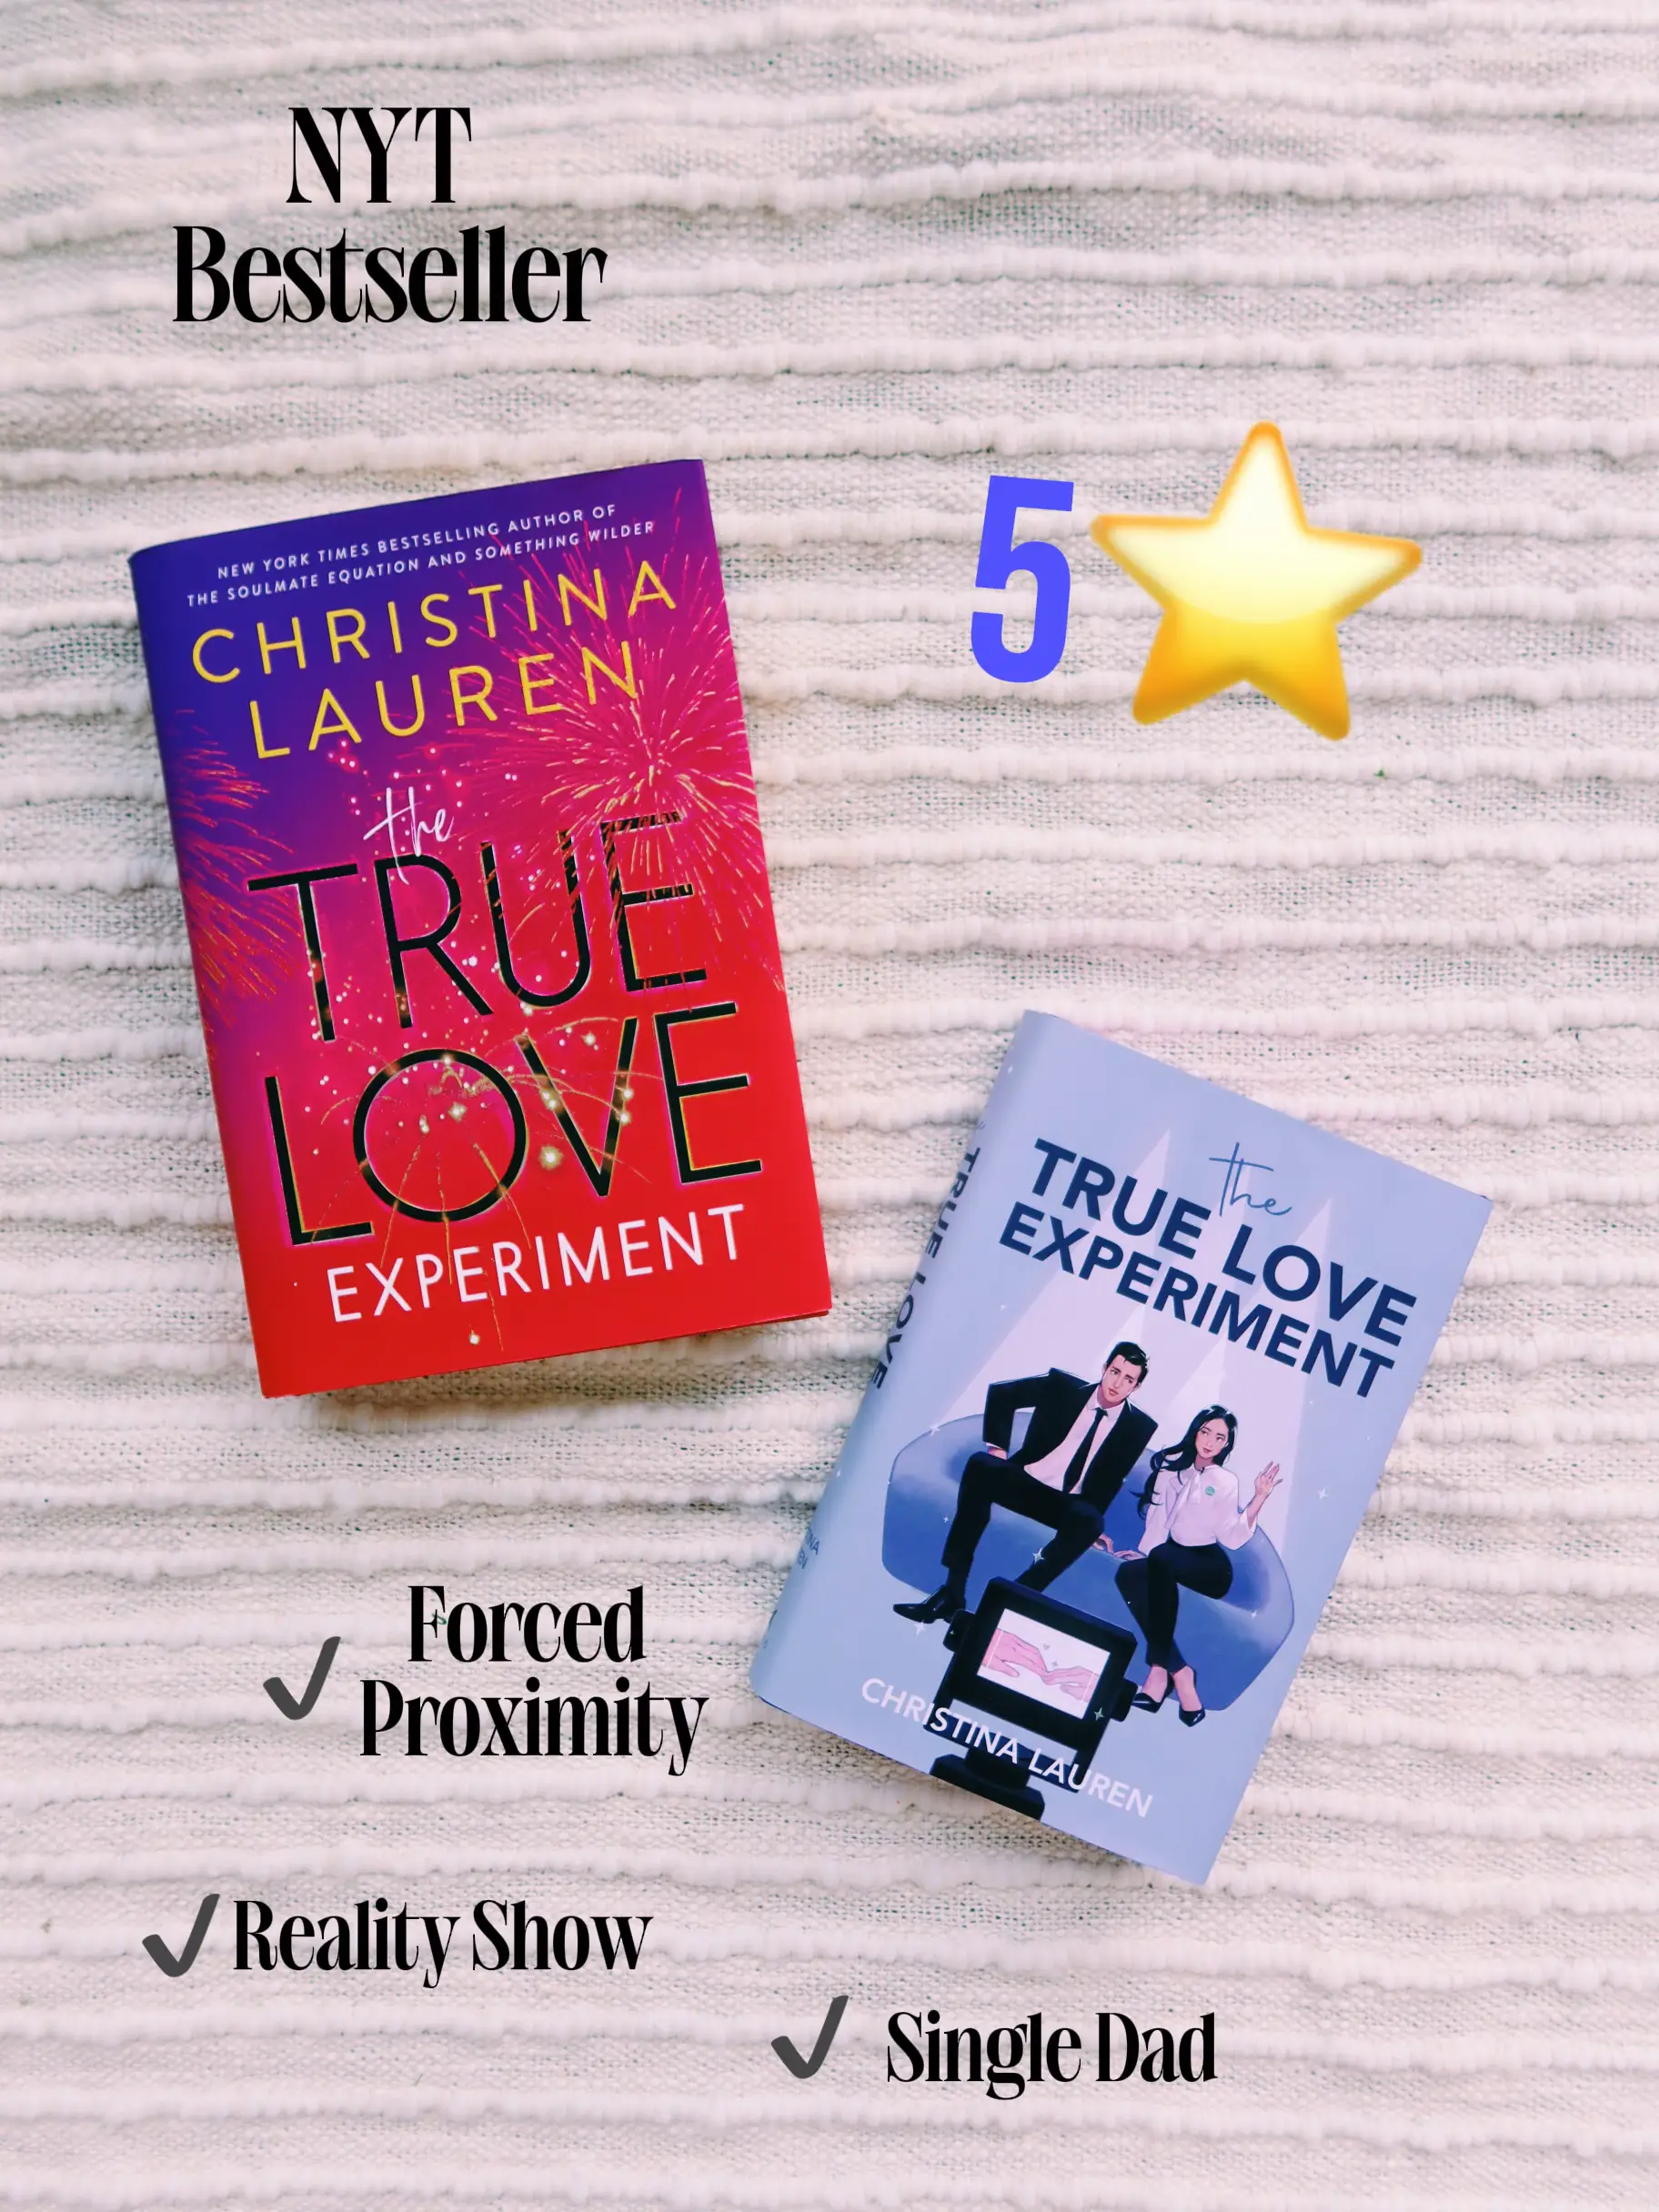 The True Love Experiment by Christina Lauren